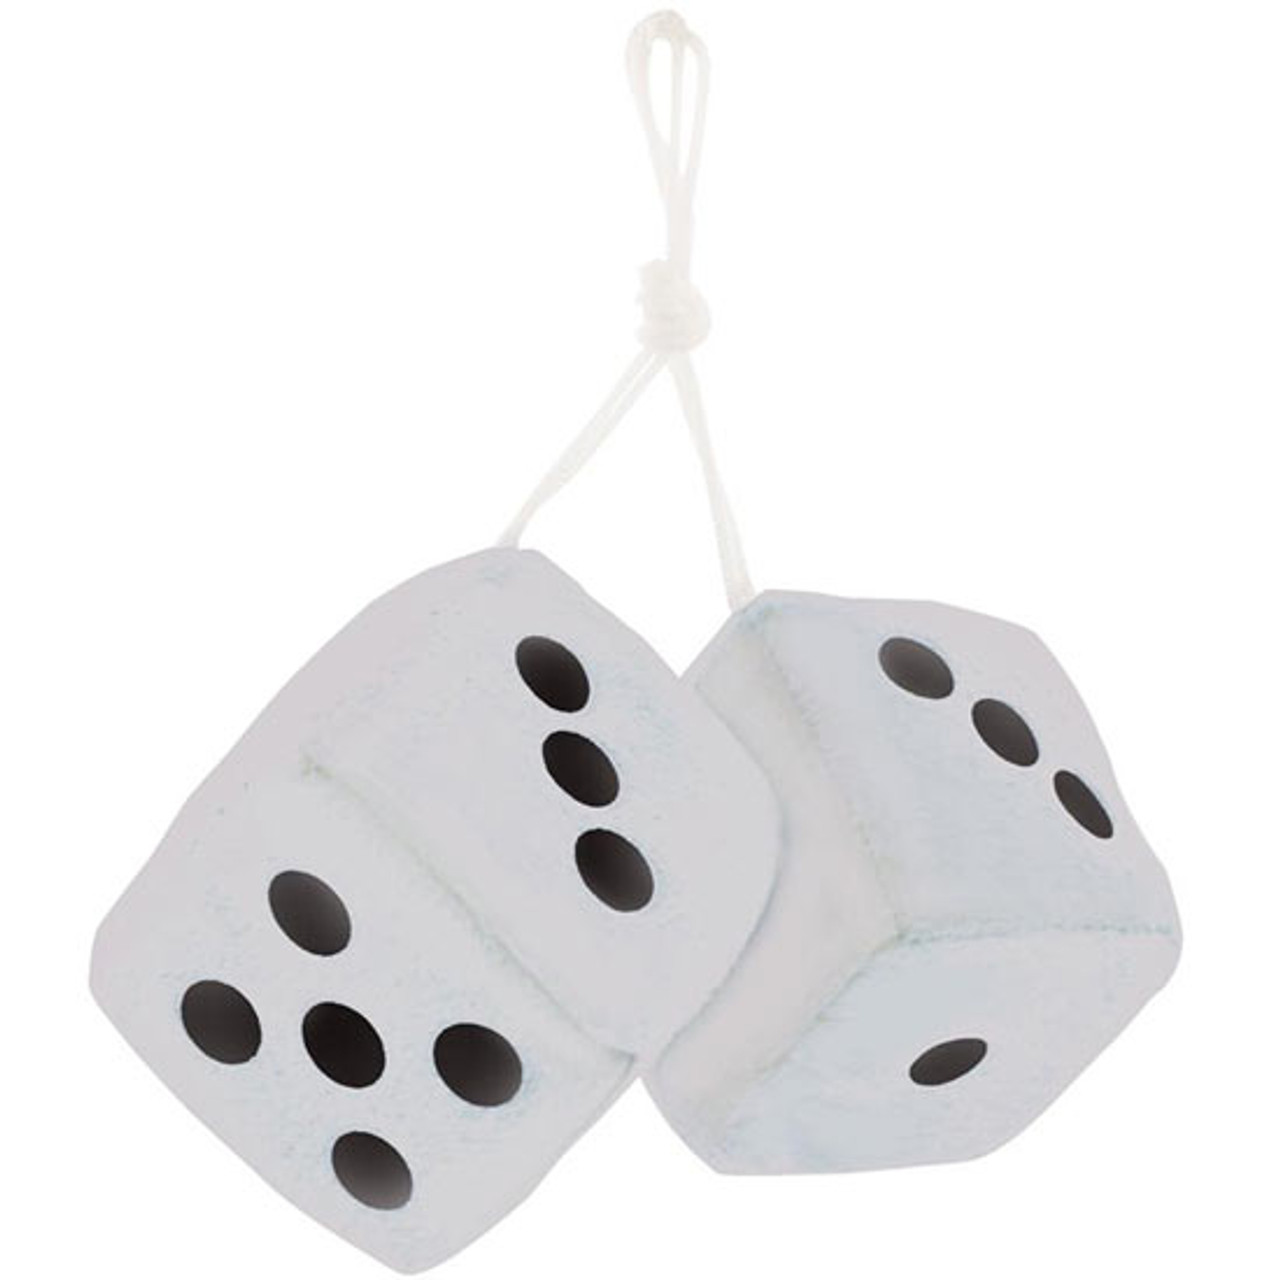 3 X 3 Inch Classic Hanging Fuzzy Dice For Rear View Mirror - 4